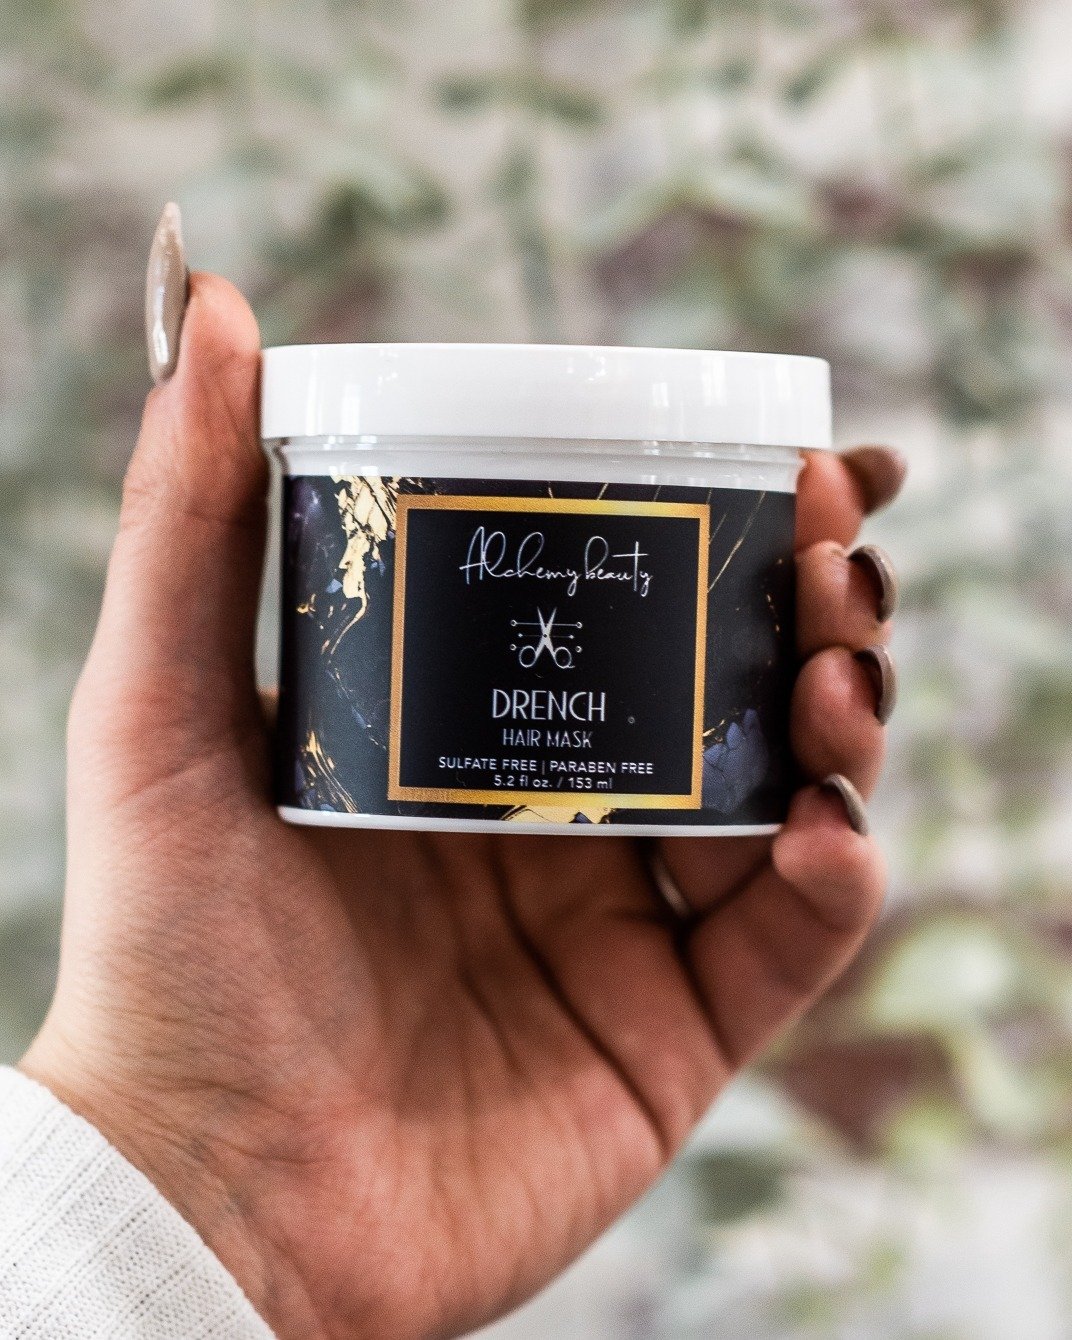 Looking to repair that winter damage? Meet DRENCH, our new favorite mask!

Transform your winter damaged locks into spring ready perfection! DRENCH eliminates breakage and frizz and adds moisture, shine and revives your hair.

It contains all the nou